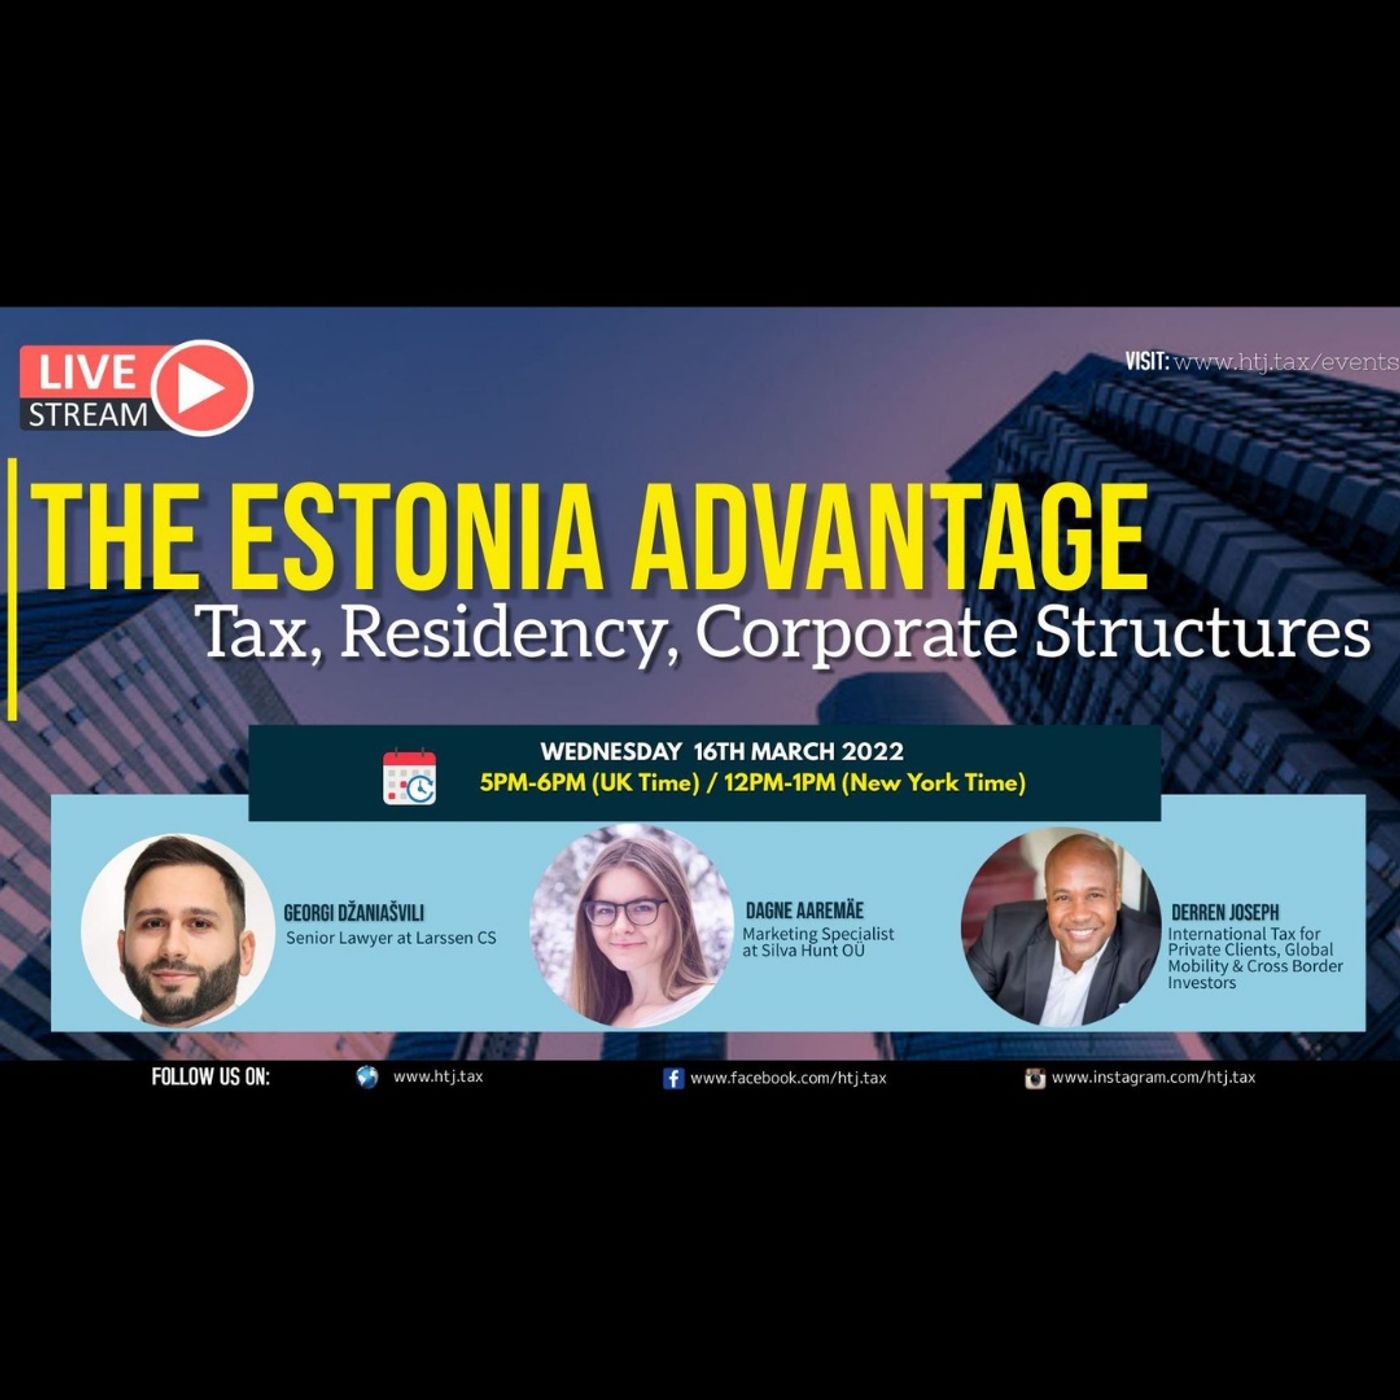 [ Offshore Tax ] The Estonia Advantage - Tax, Residency, Corporate Structures - 16th March 2022